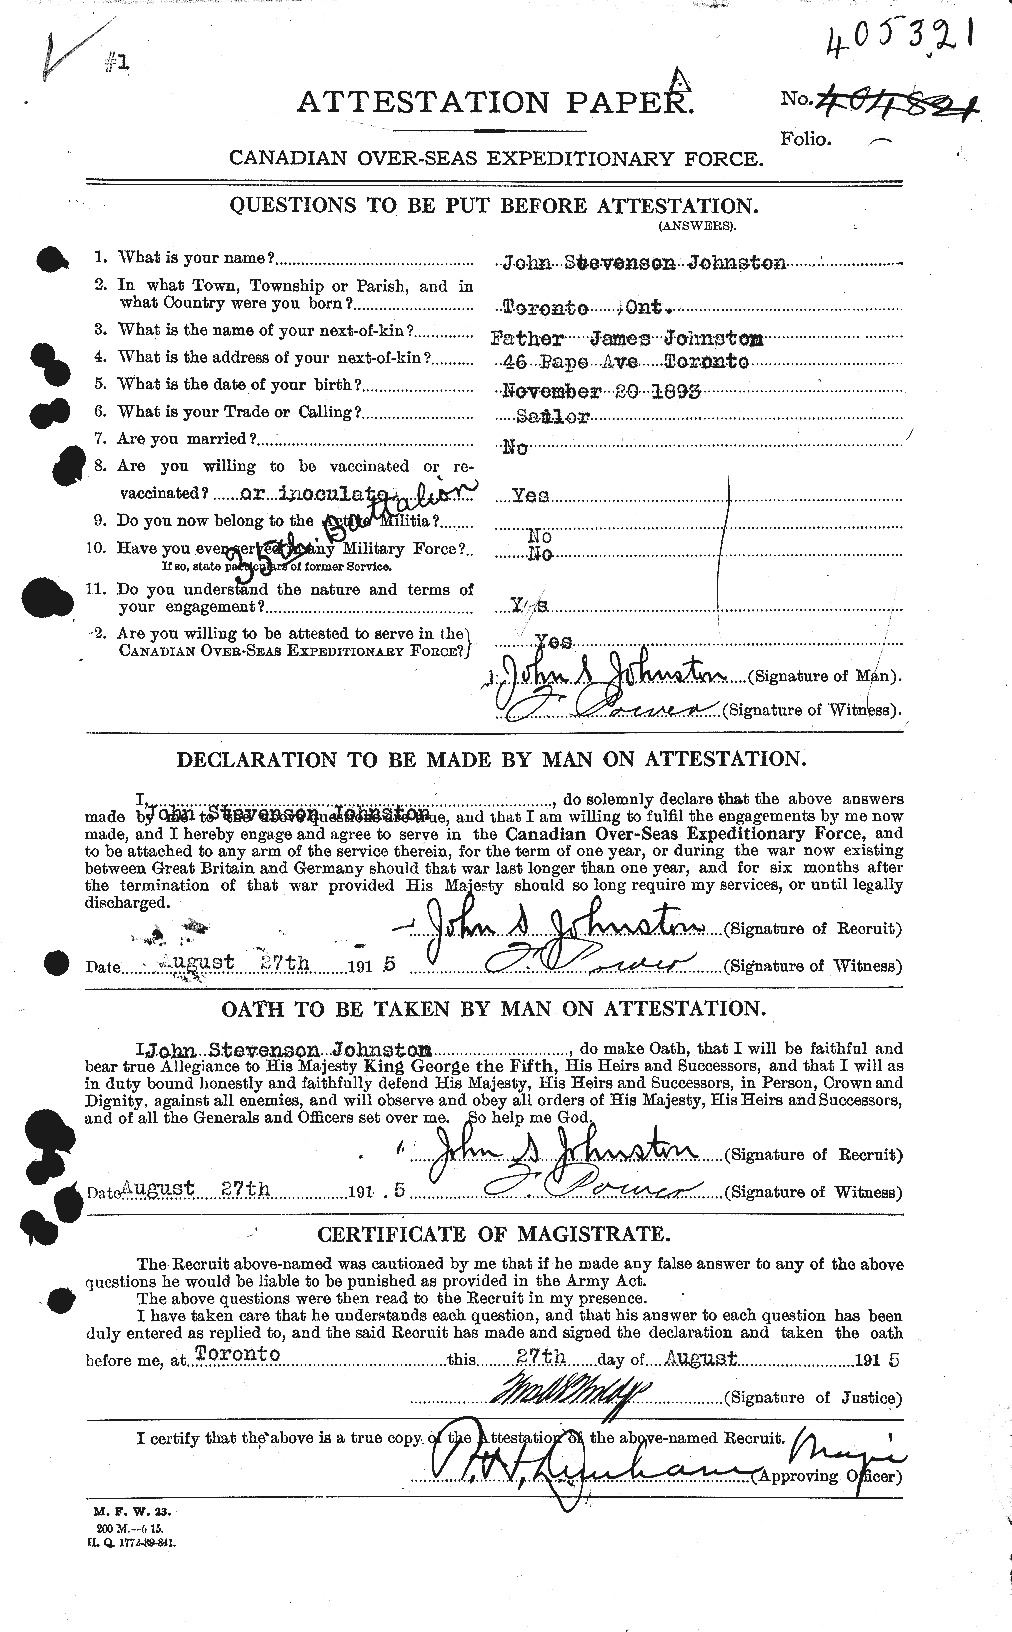 Personnel Records of the First World War - CEF 422867a